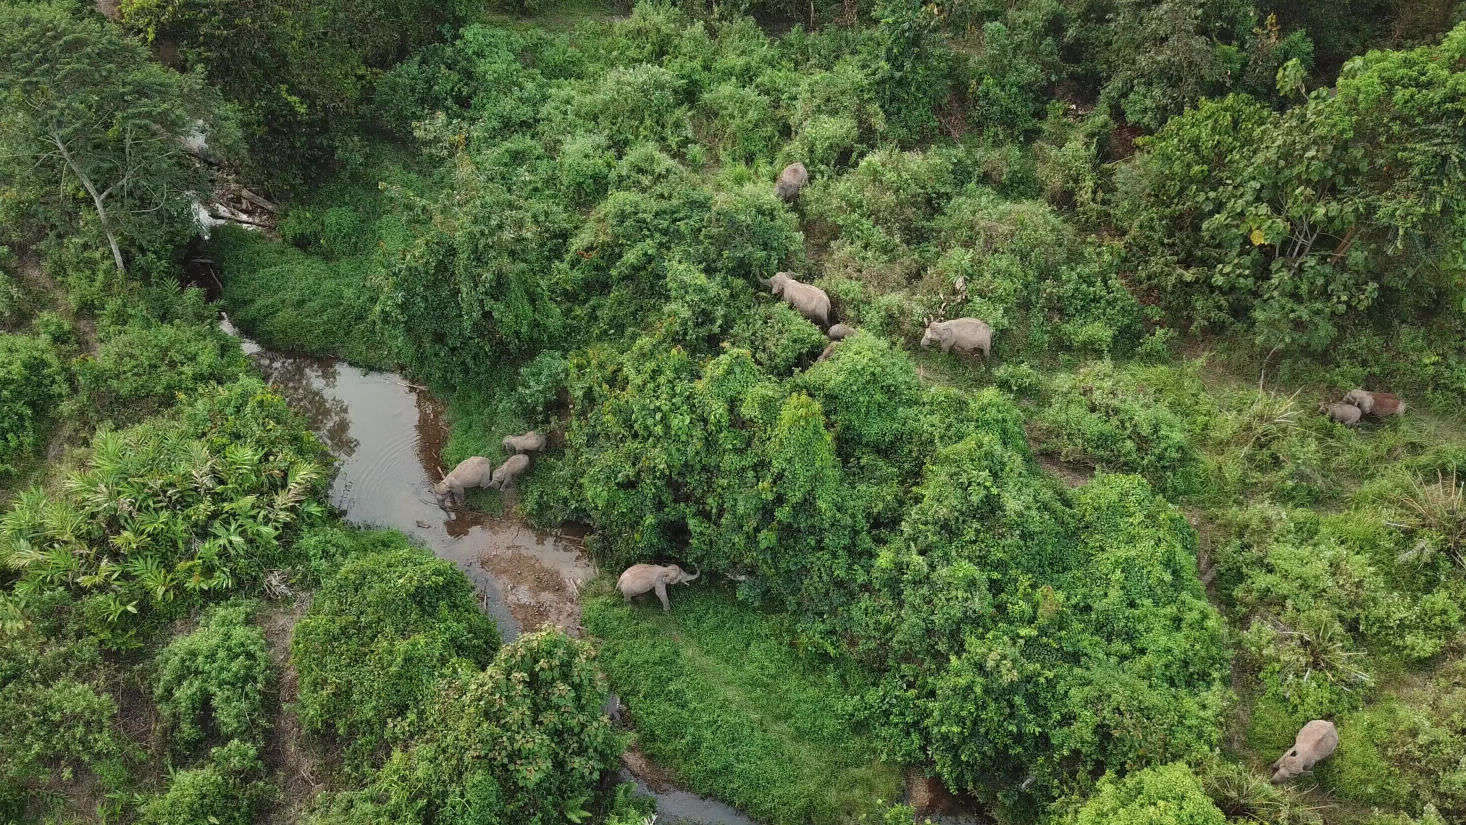 A group of elephants move to a watering hole to drink